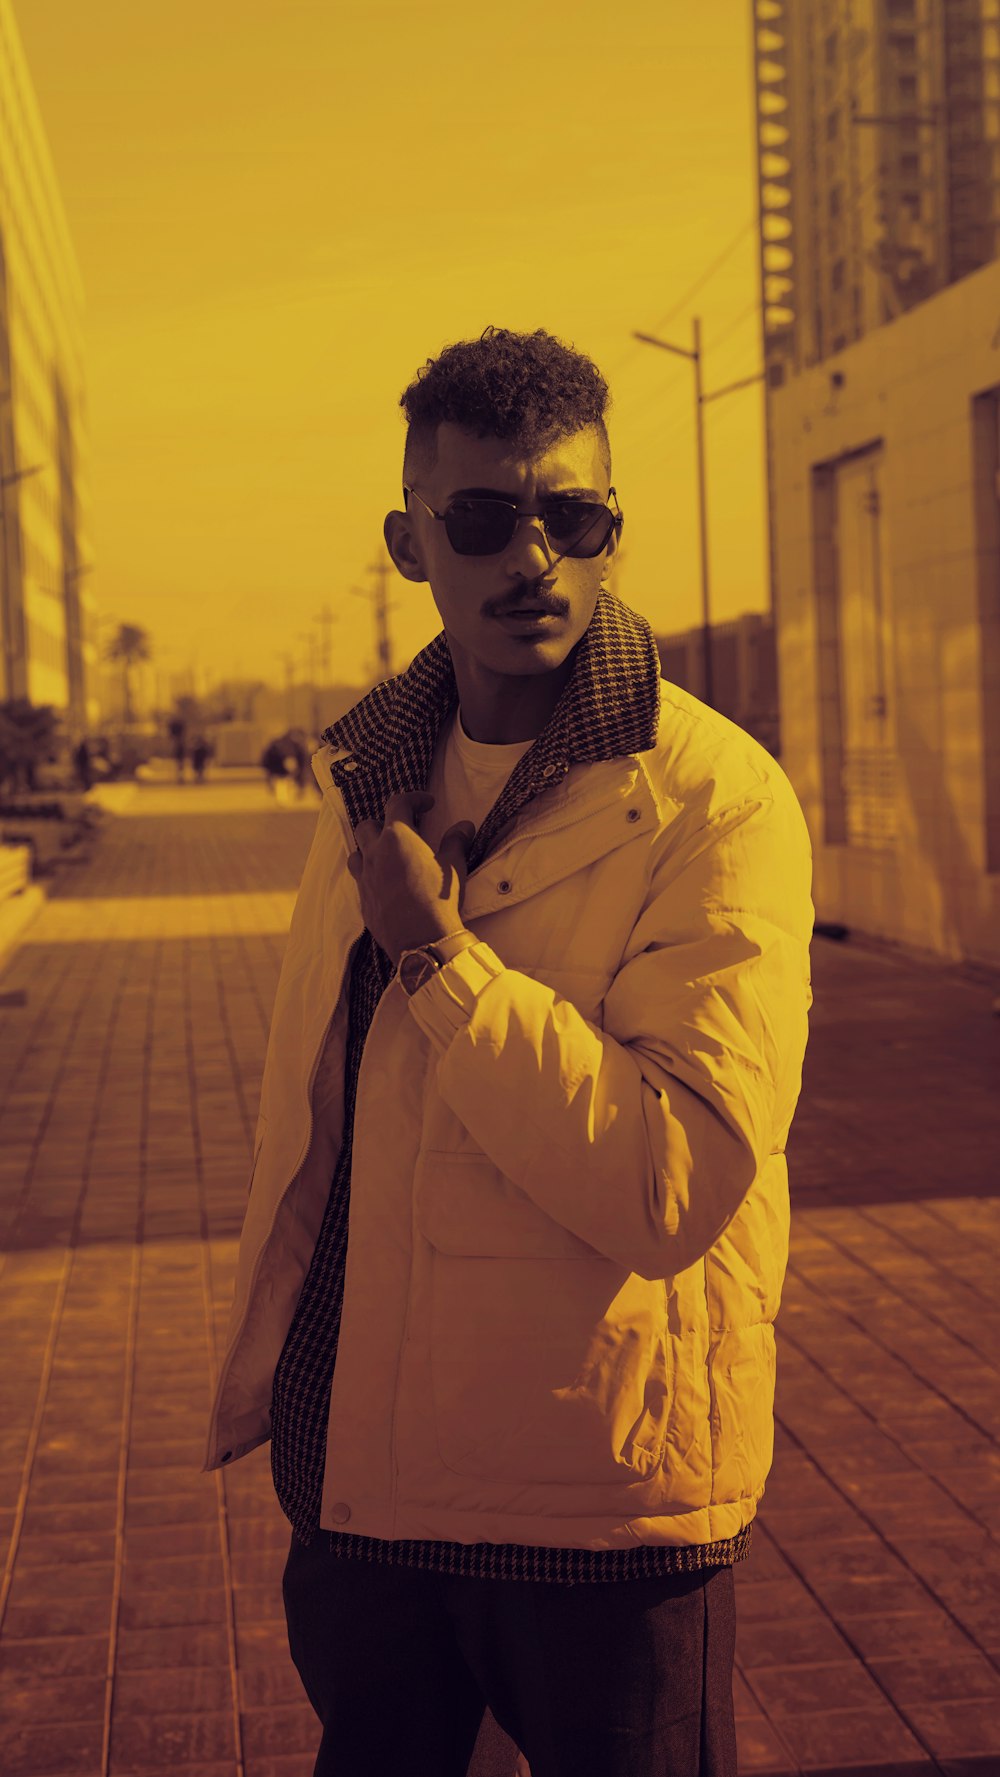 a man in a jacket and sunglasses standing on a sidewalk